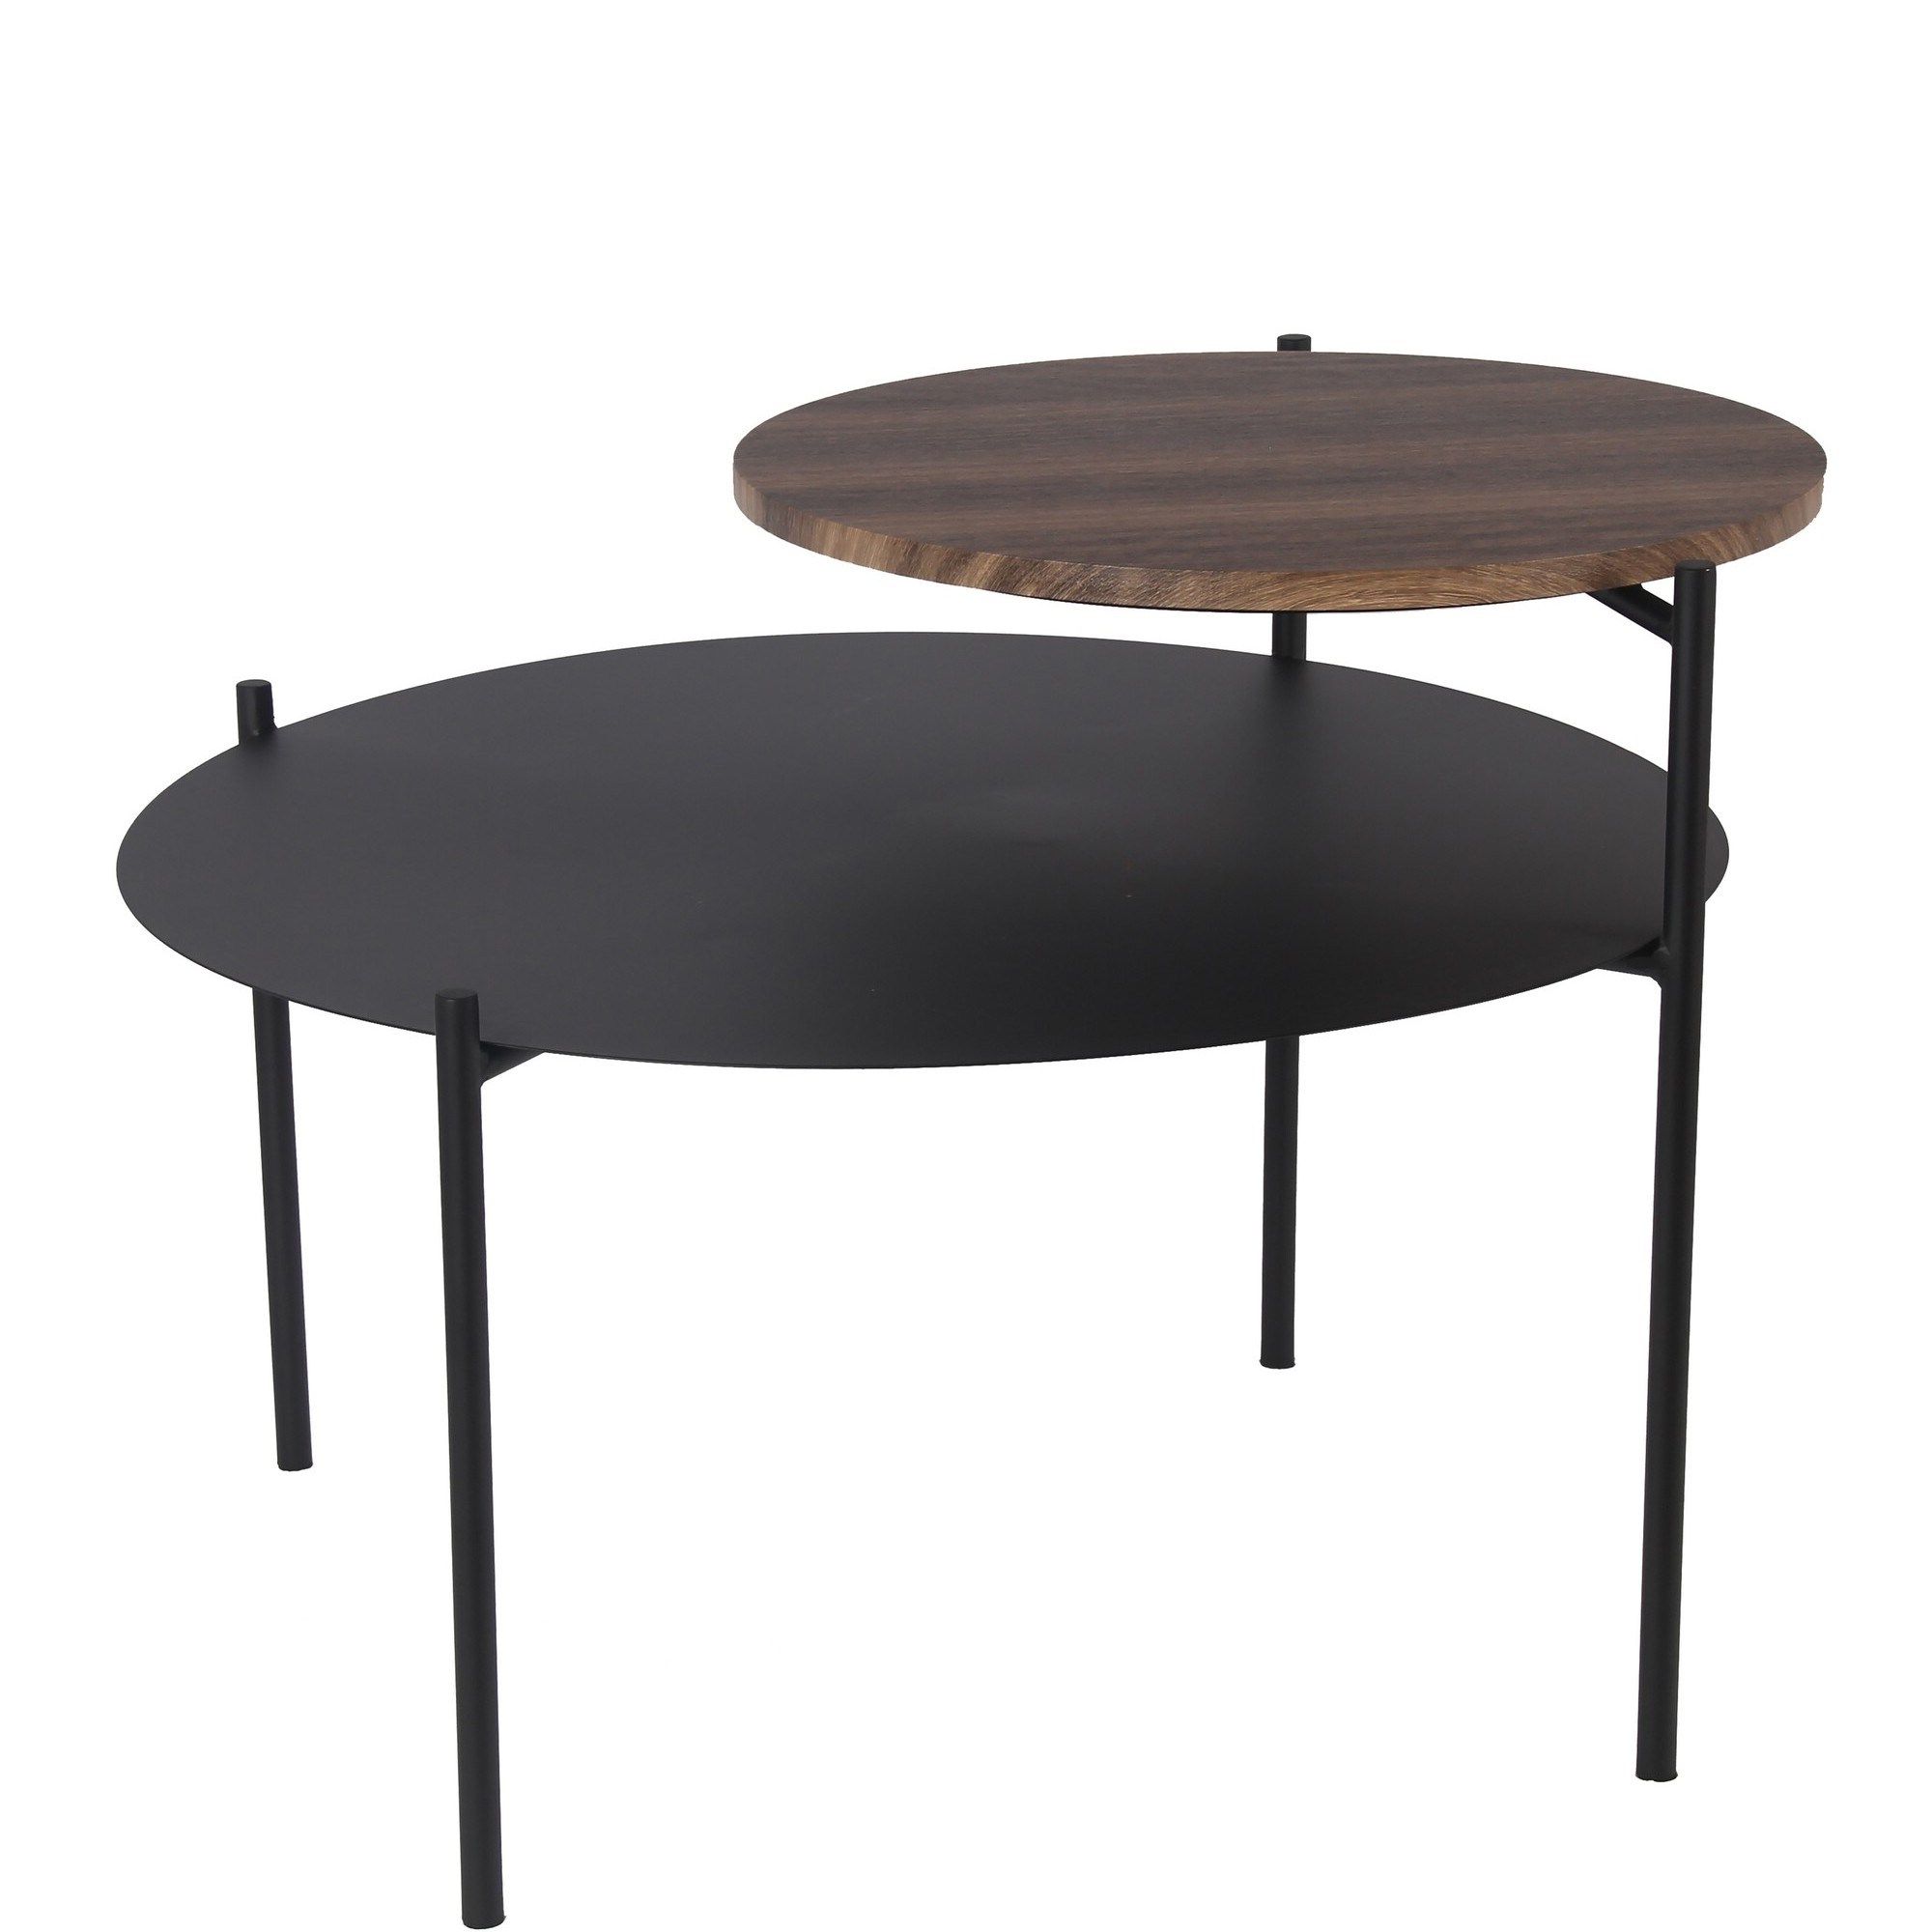 Most Recent 2 Tier Accent Table With Round Metal Top, Brown – Overstock – 35208530 In 2 Tier Metal Outdoor Tables (View 1 of 15)